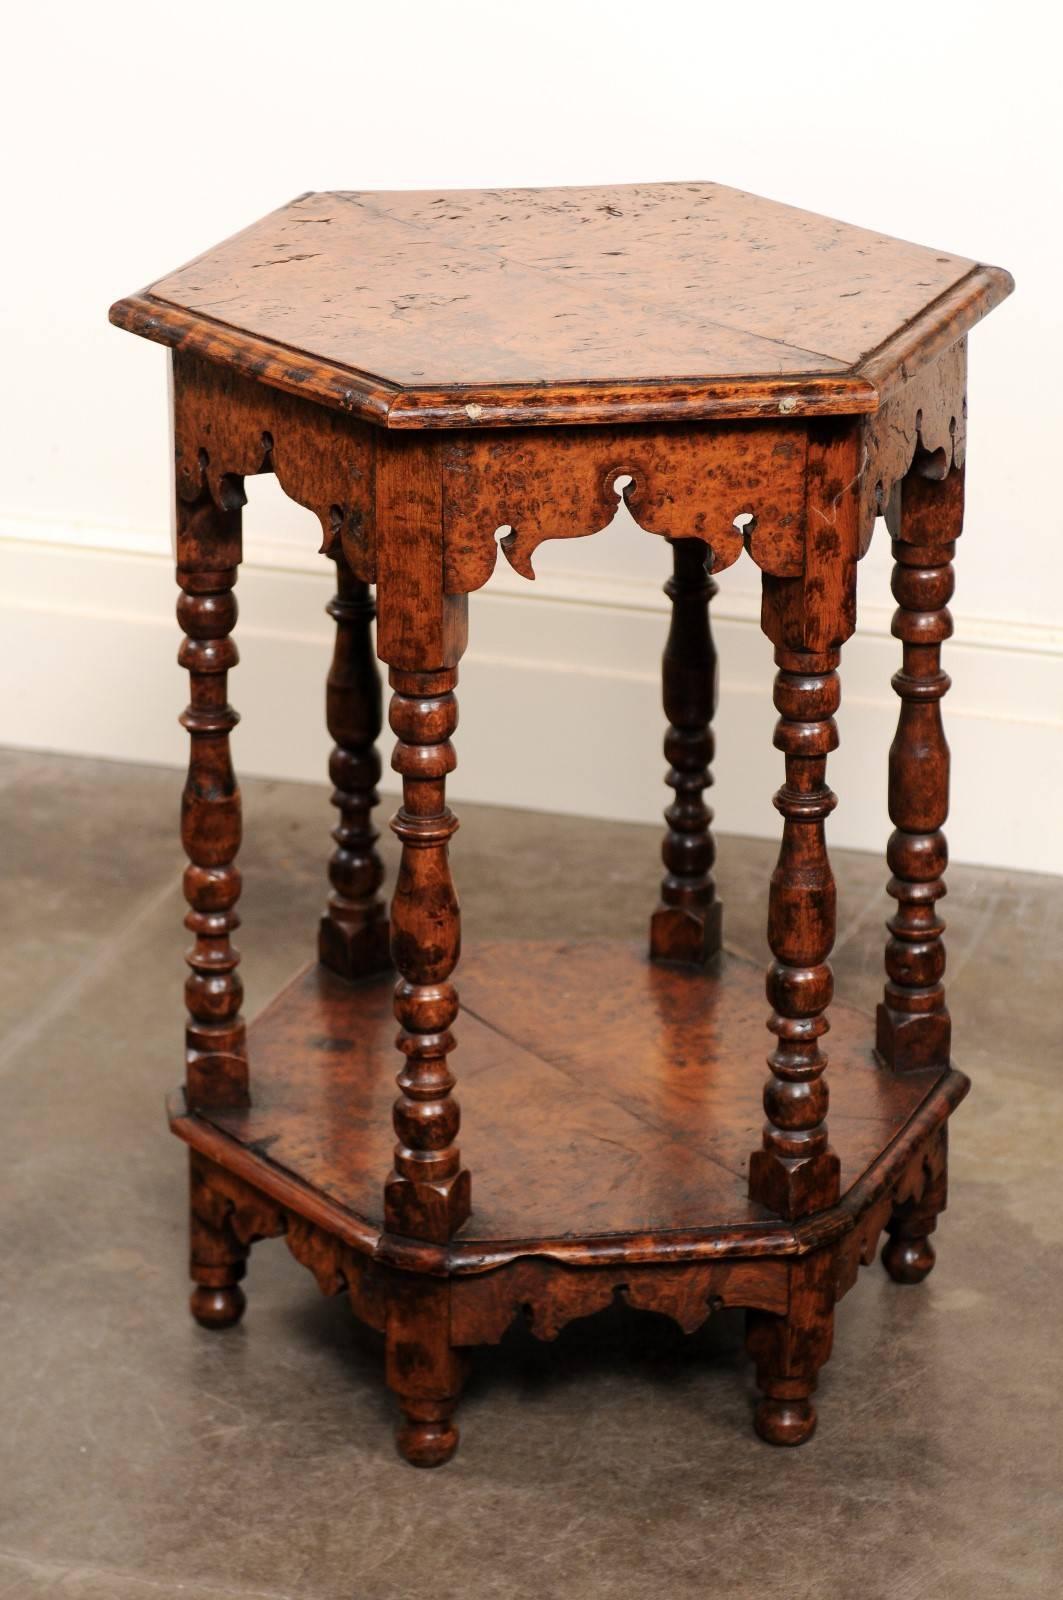 19th Century English Burl Wood Hexagonal Side Table with Turned Legs and Richly Carved Apron For Sale